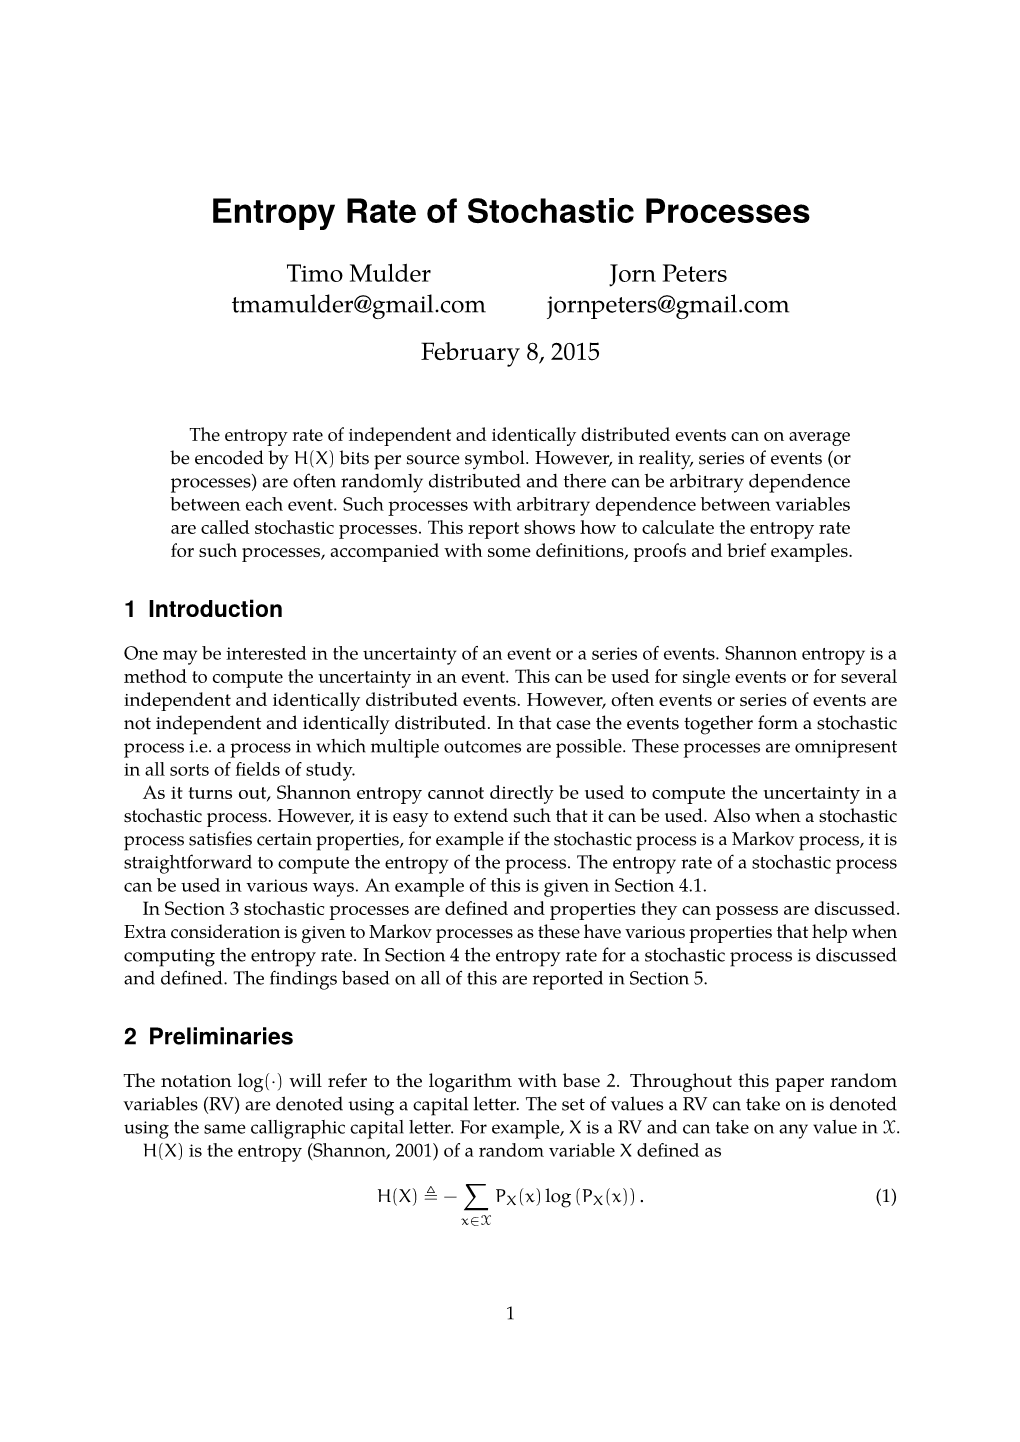 Entropy Rate of Stochastic Processes